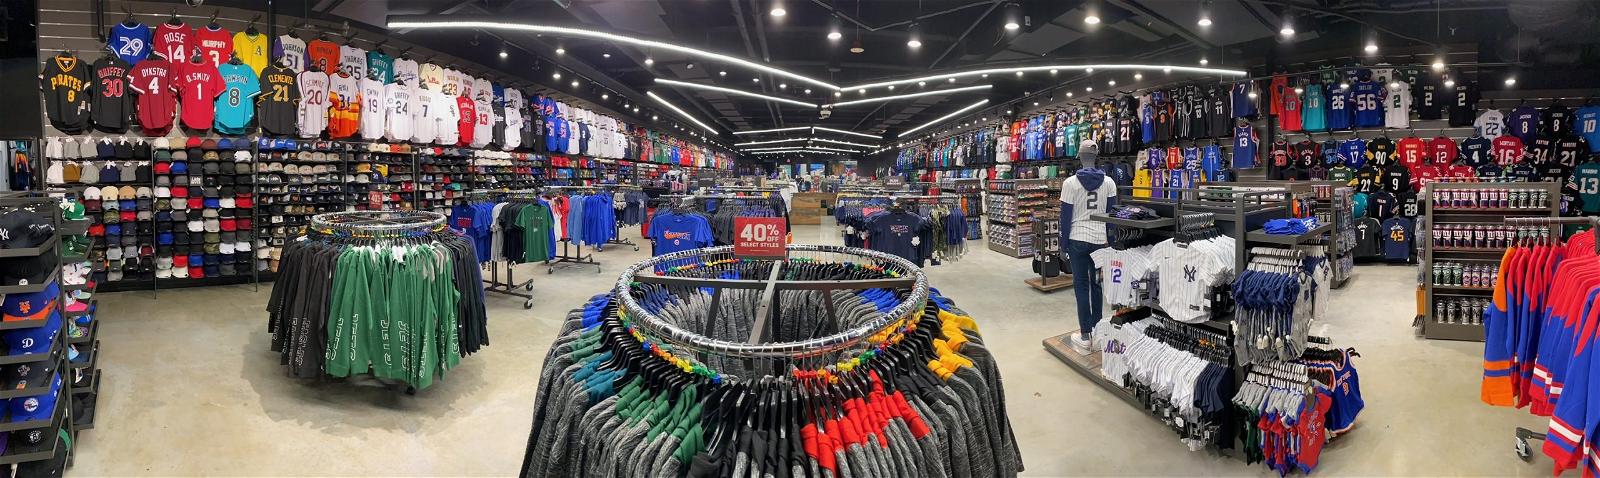 Lids - Our newest store is also our BIGGEST Lids store